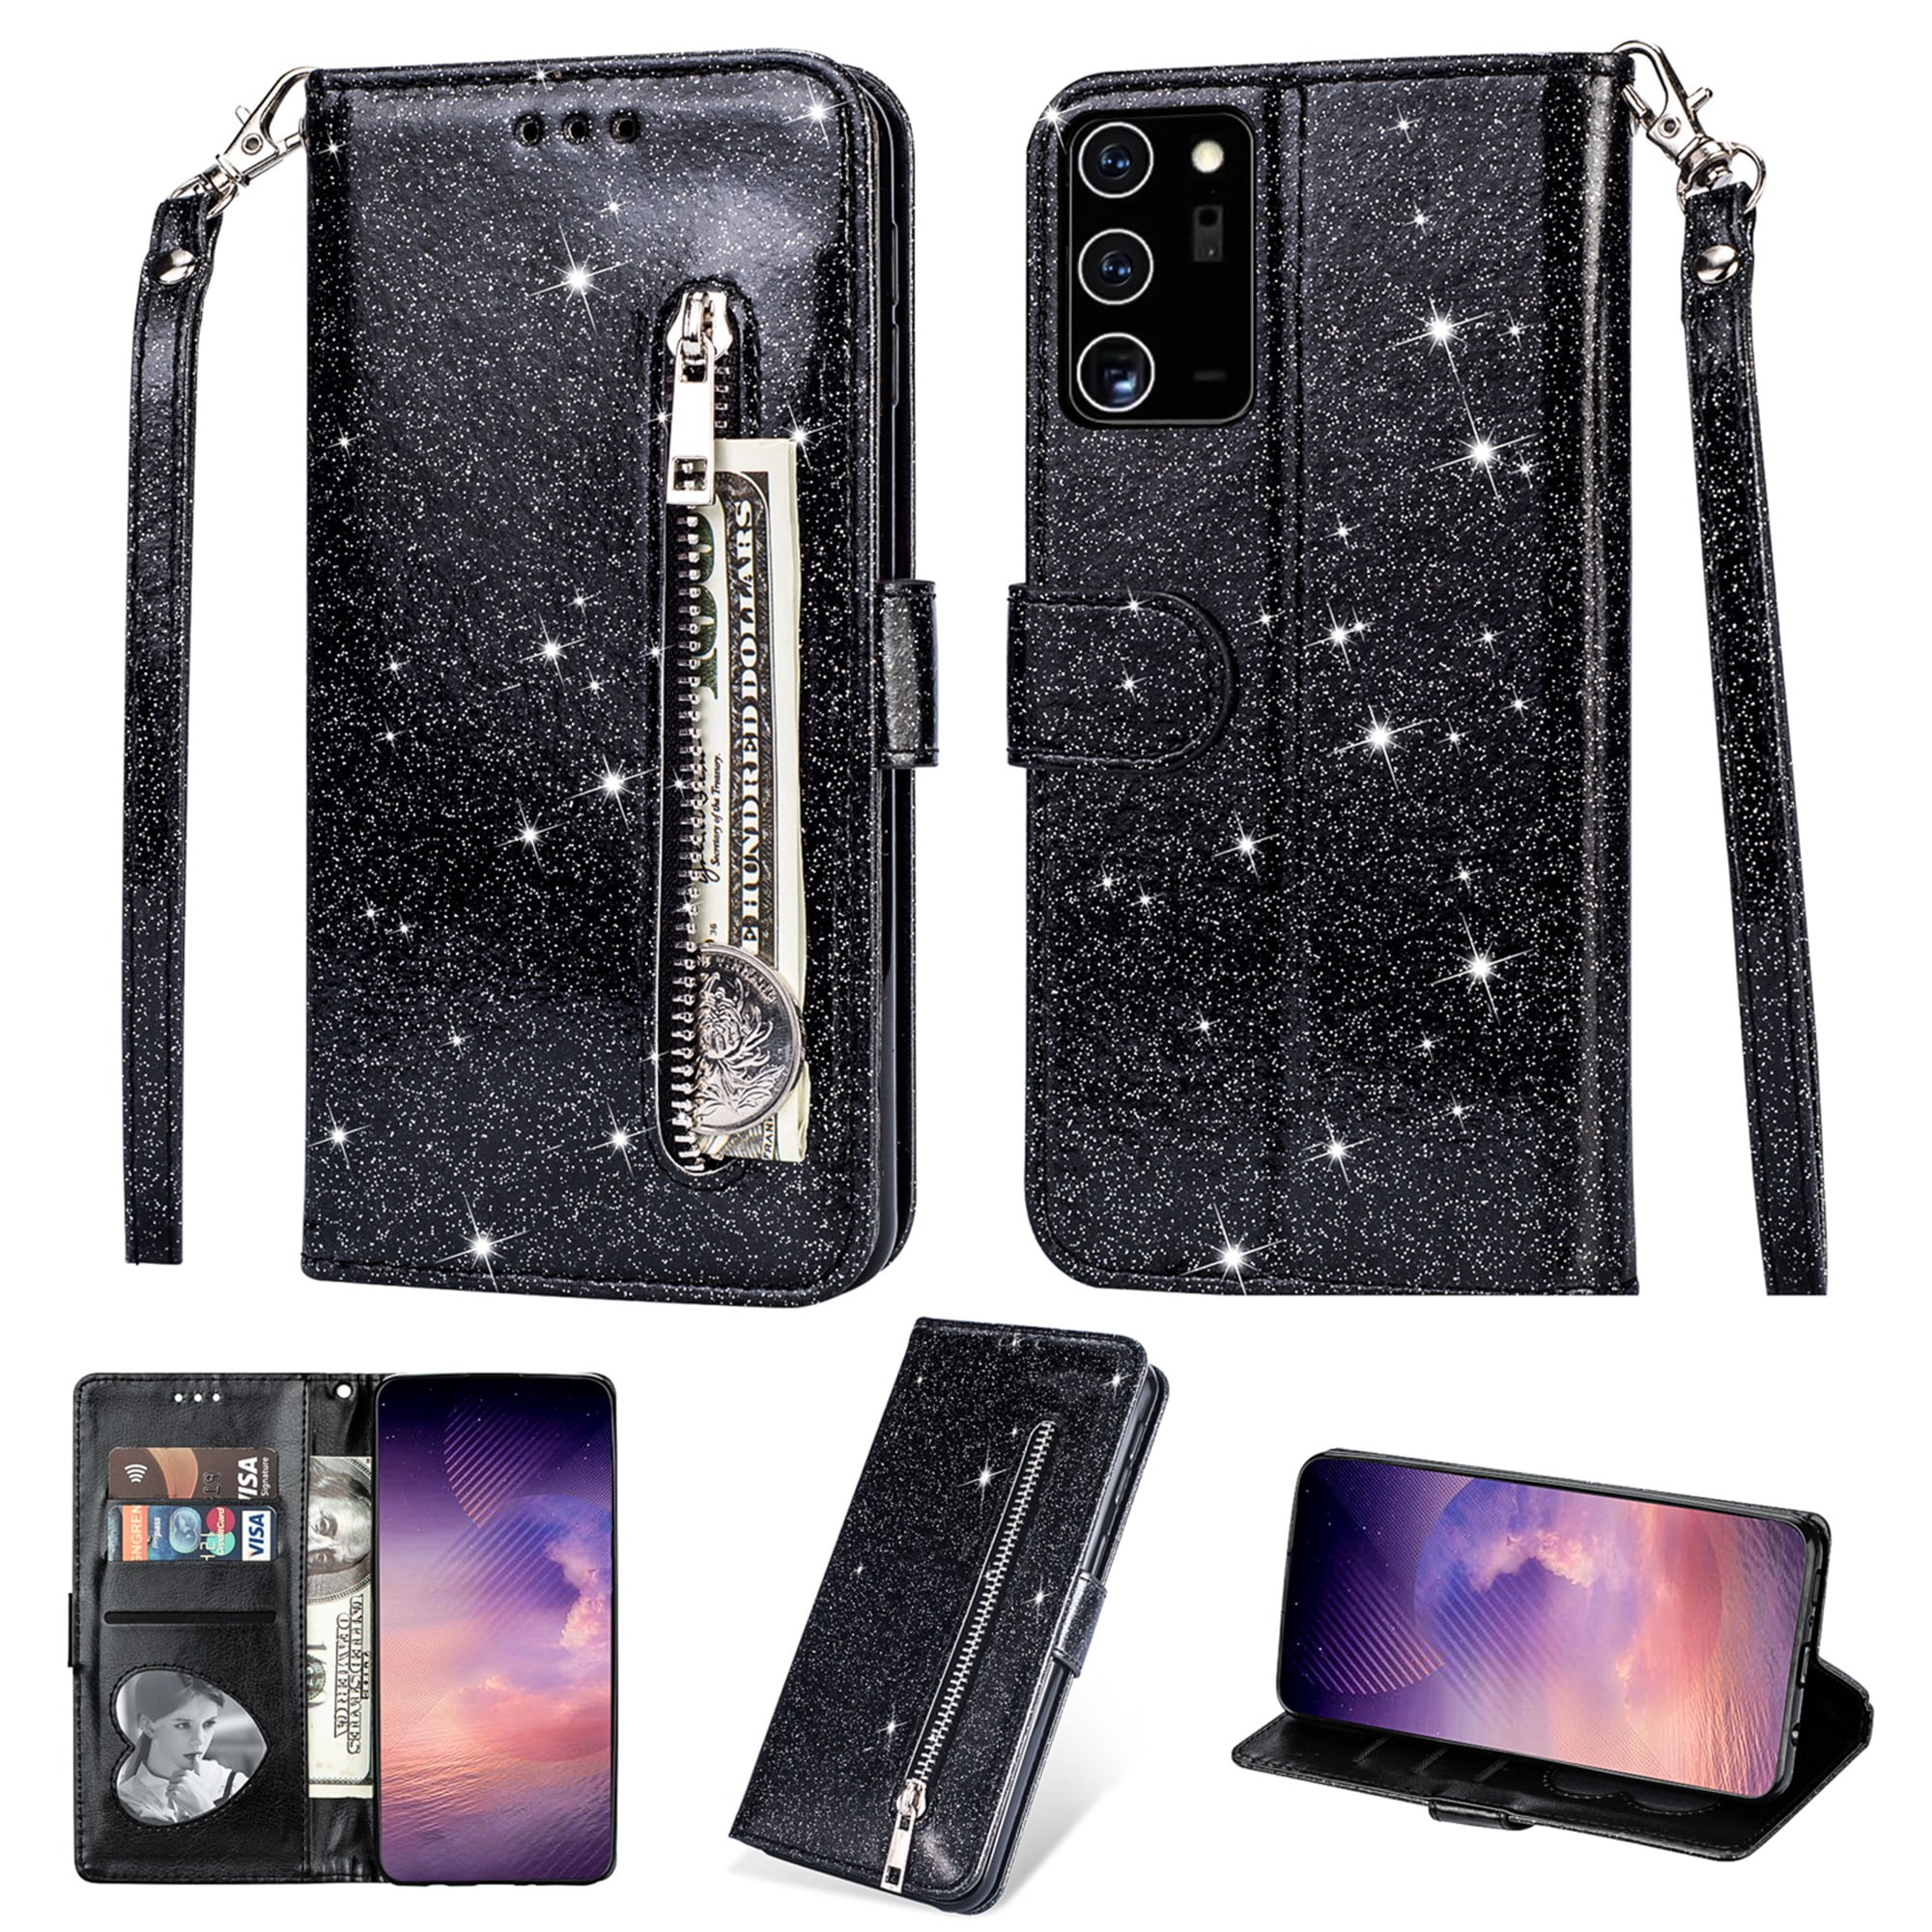 IKASEFU Compatible with Samsung Galaxy A51 Case Glitter Shiny Pu Leather Flash Bling Wallet Strap Case with Card Holder Magnetic Kickstand Shockproof Protective Flip Bumper Cover Case black 